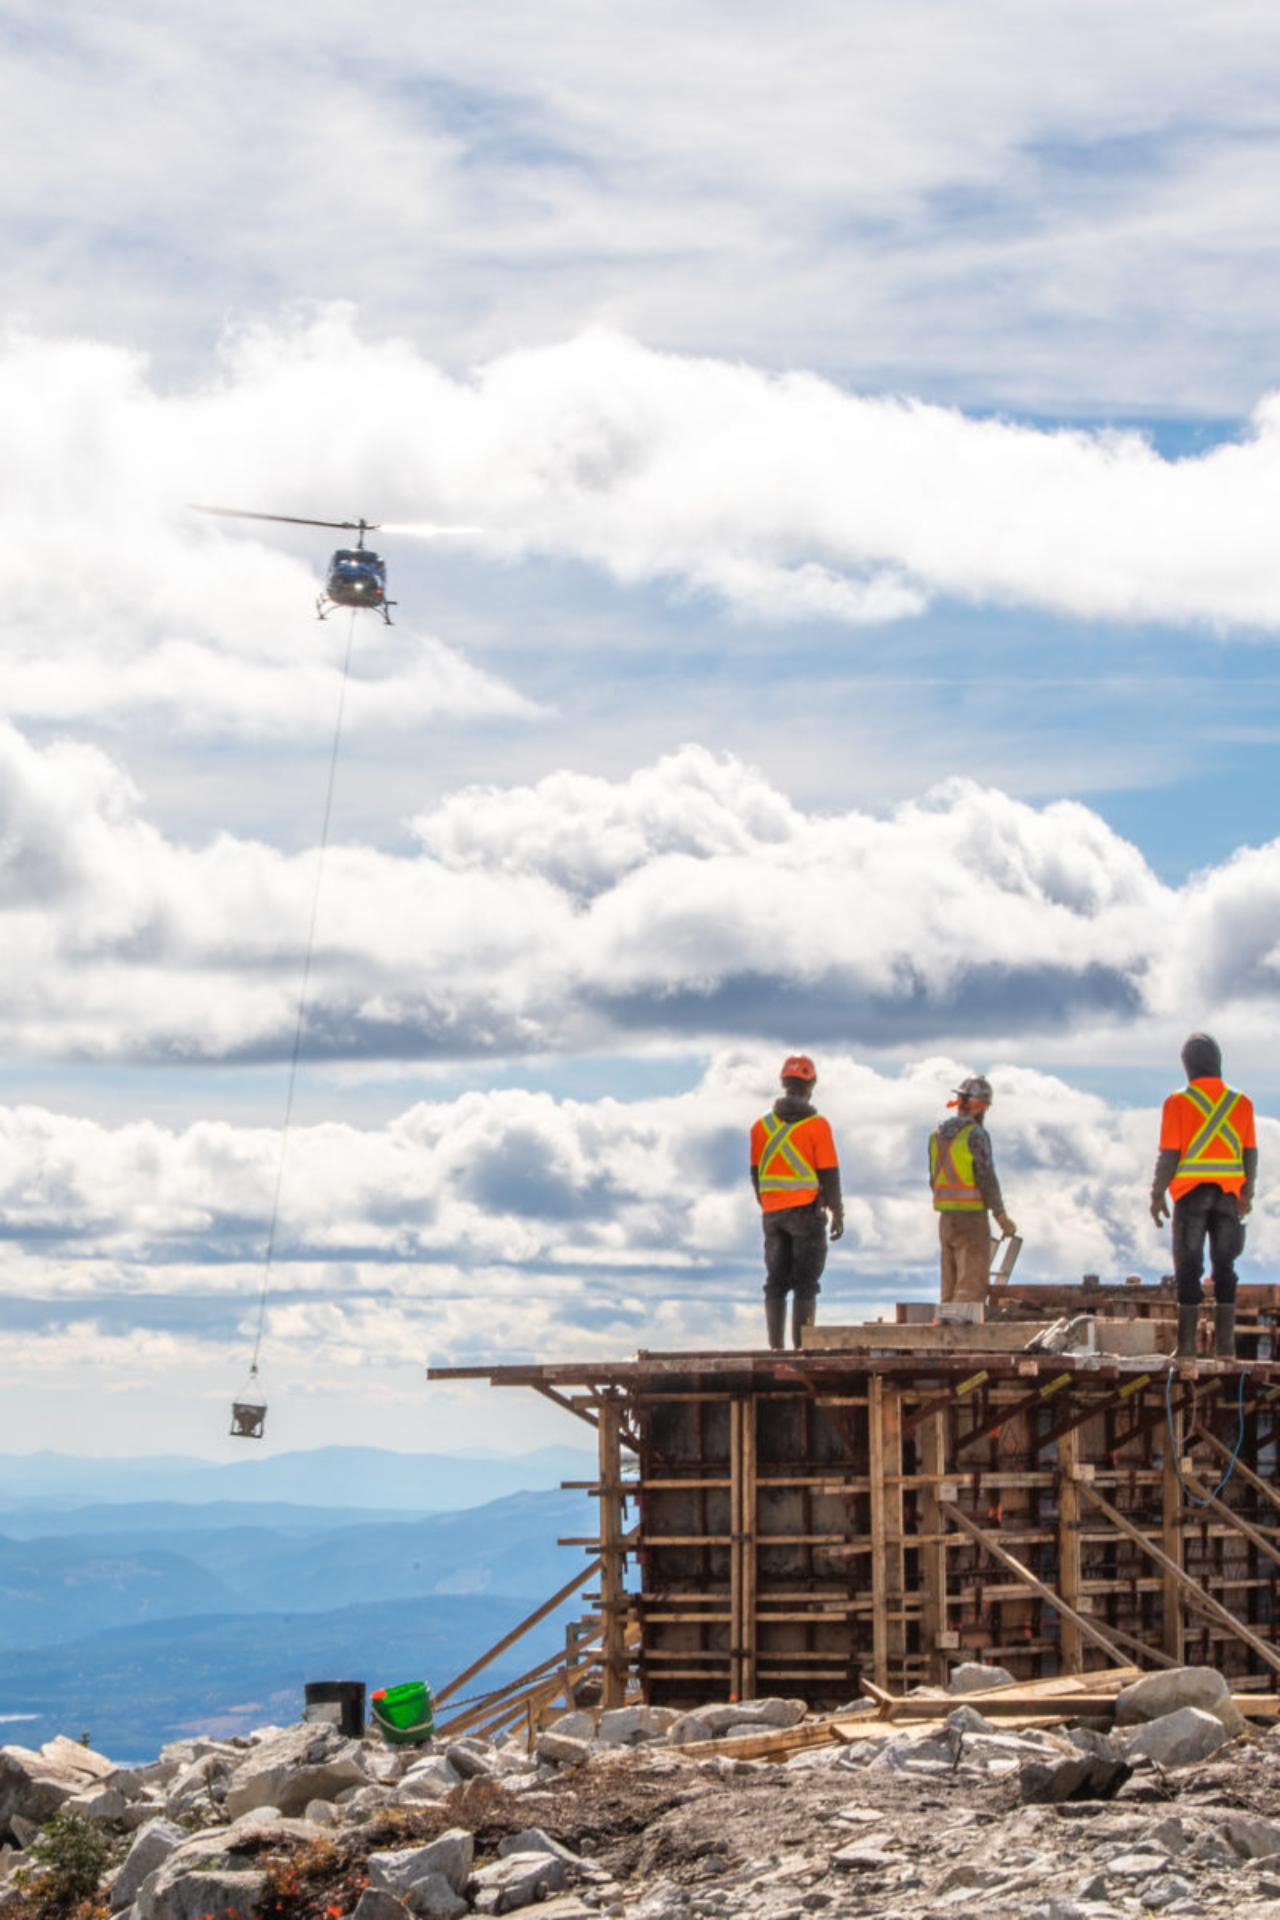 Valhalla Helicopters: A Big Help at Big White